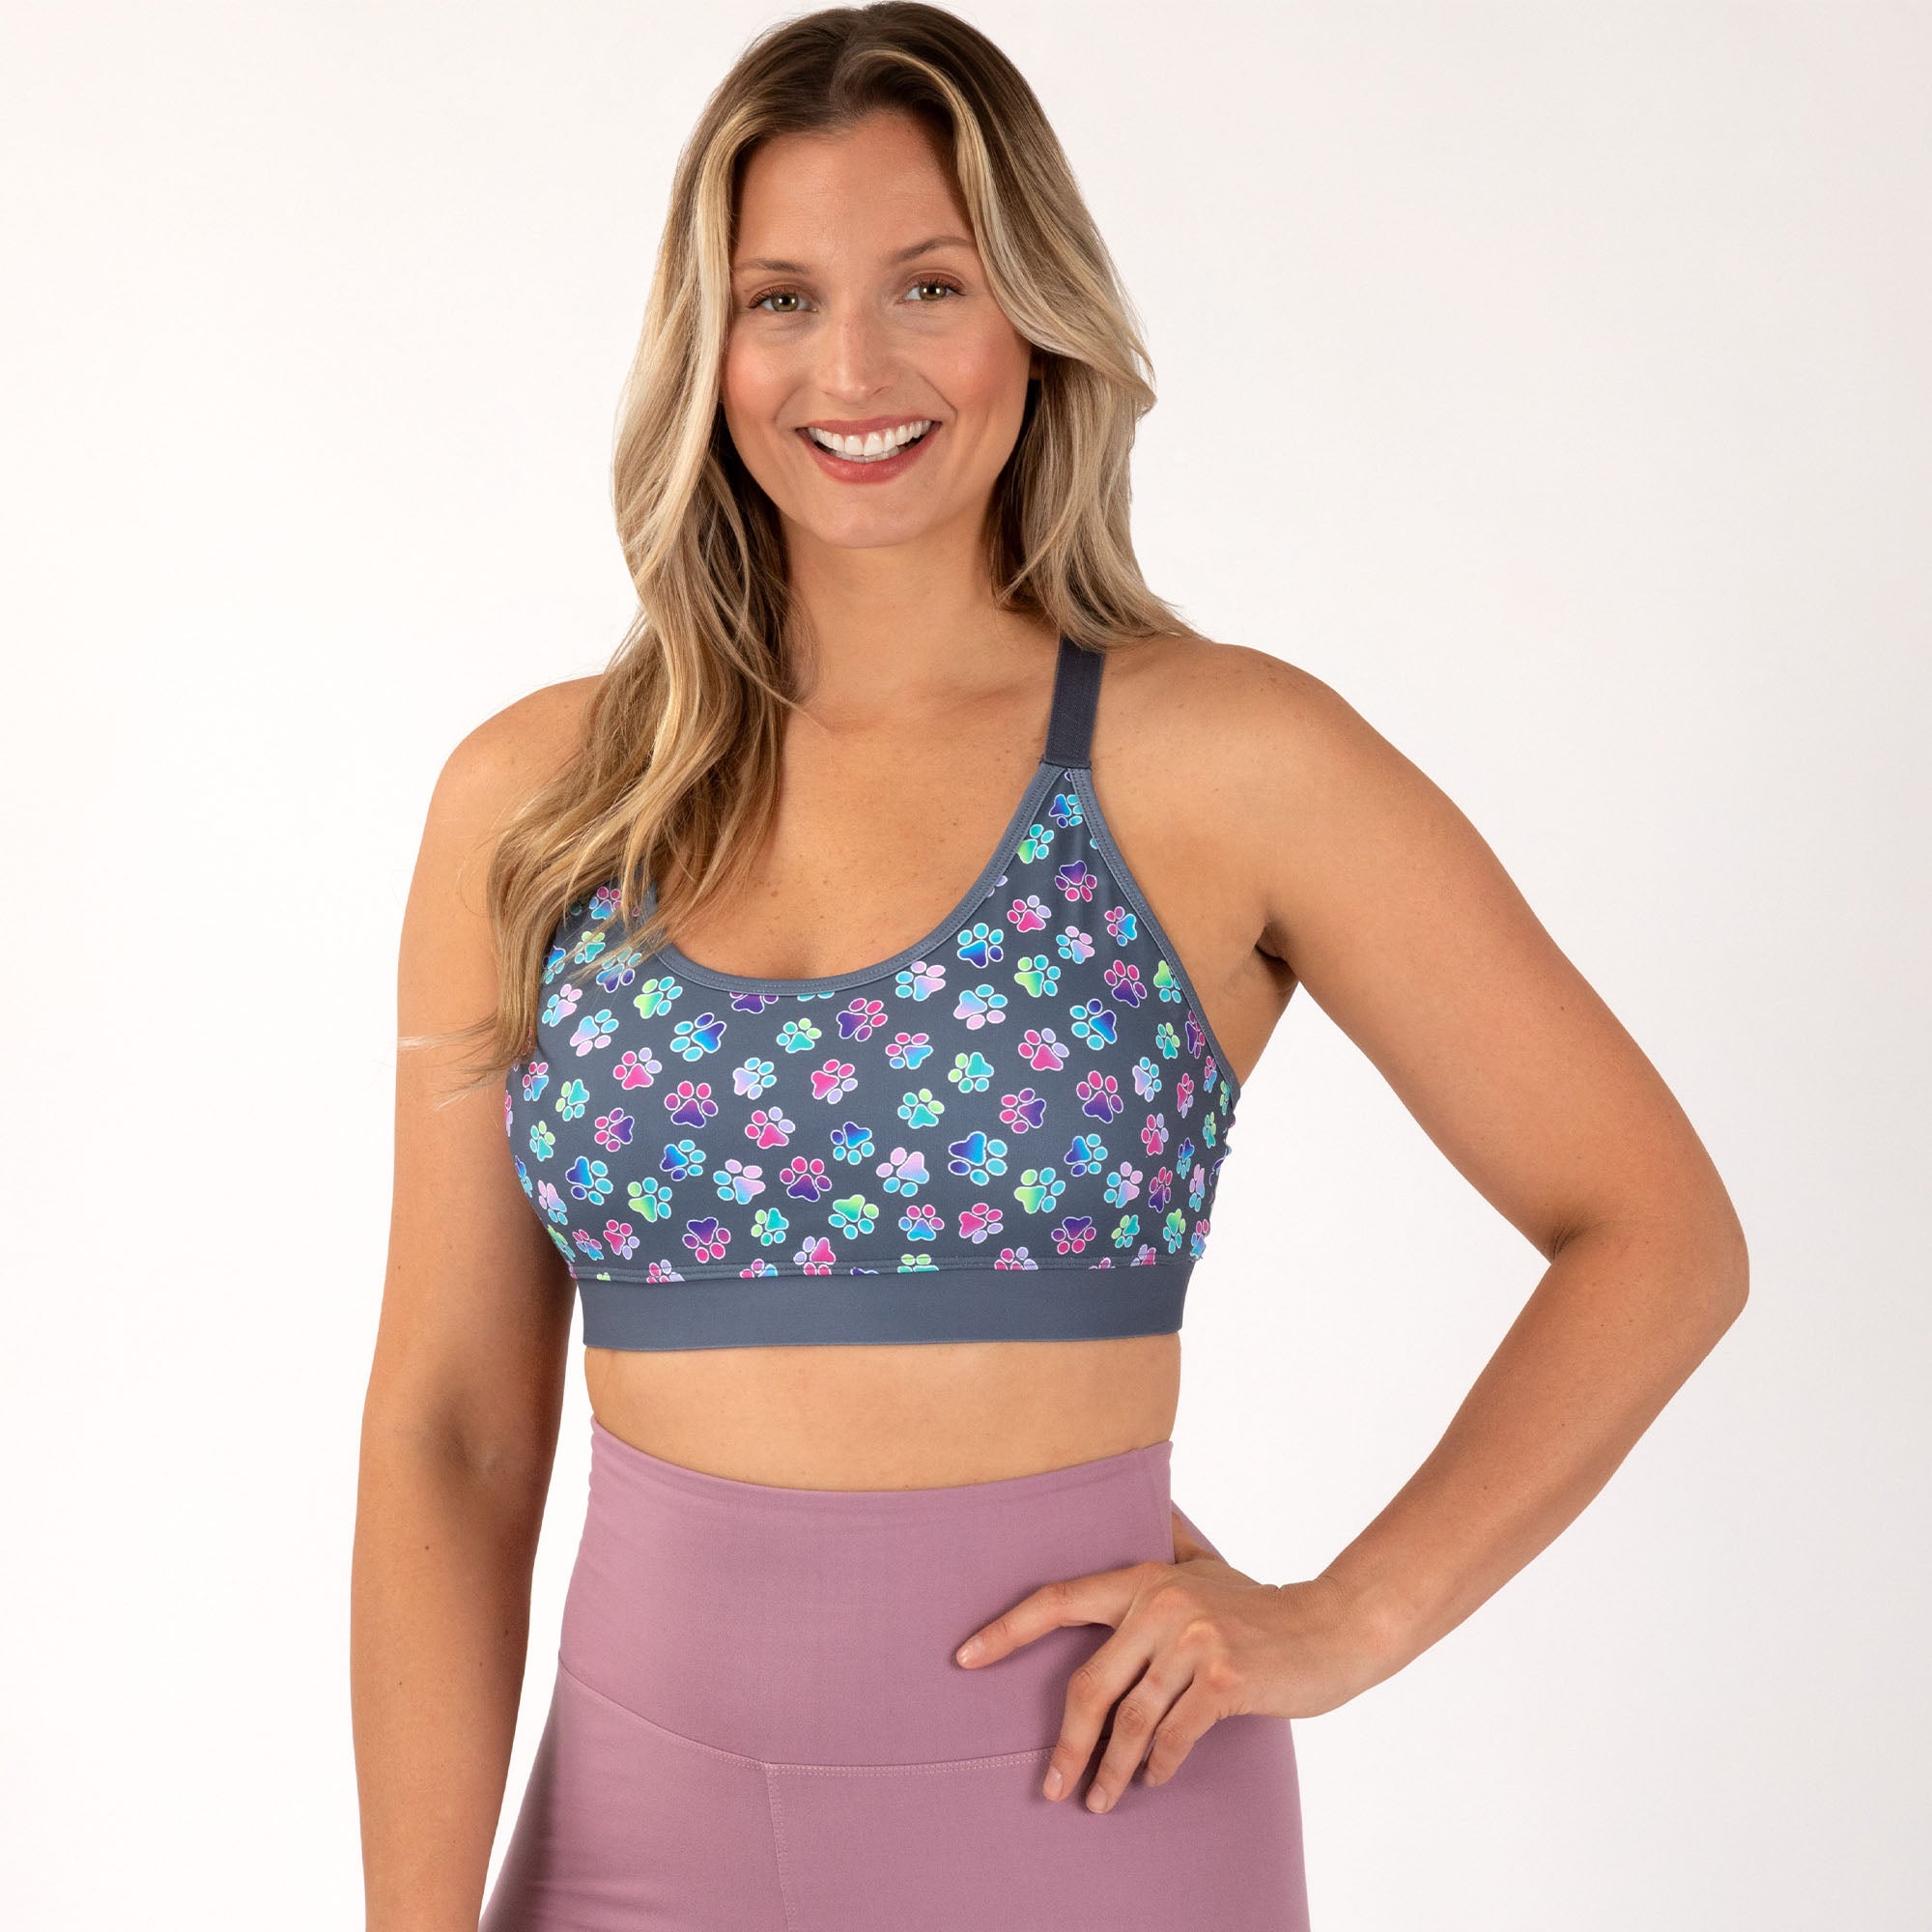 Wide Strap Adjustable Sports Bra - Blue Paisley Paws - S